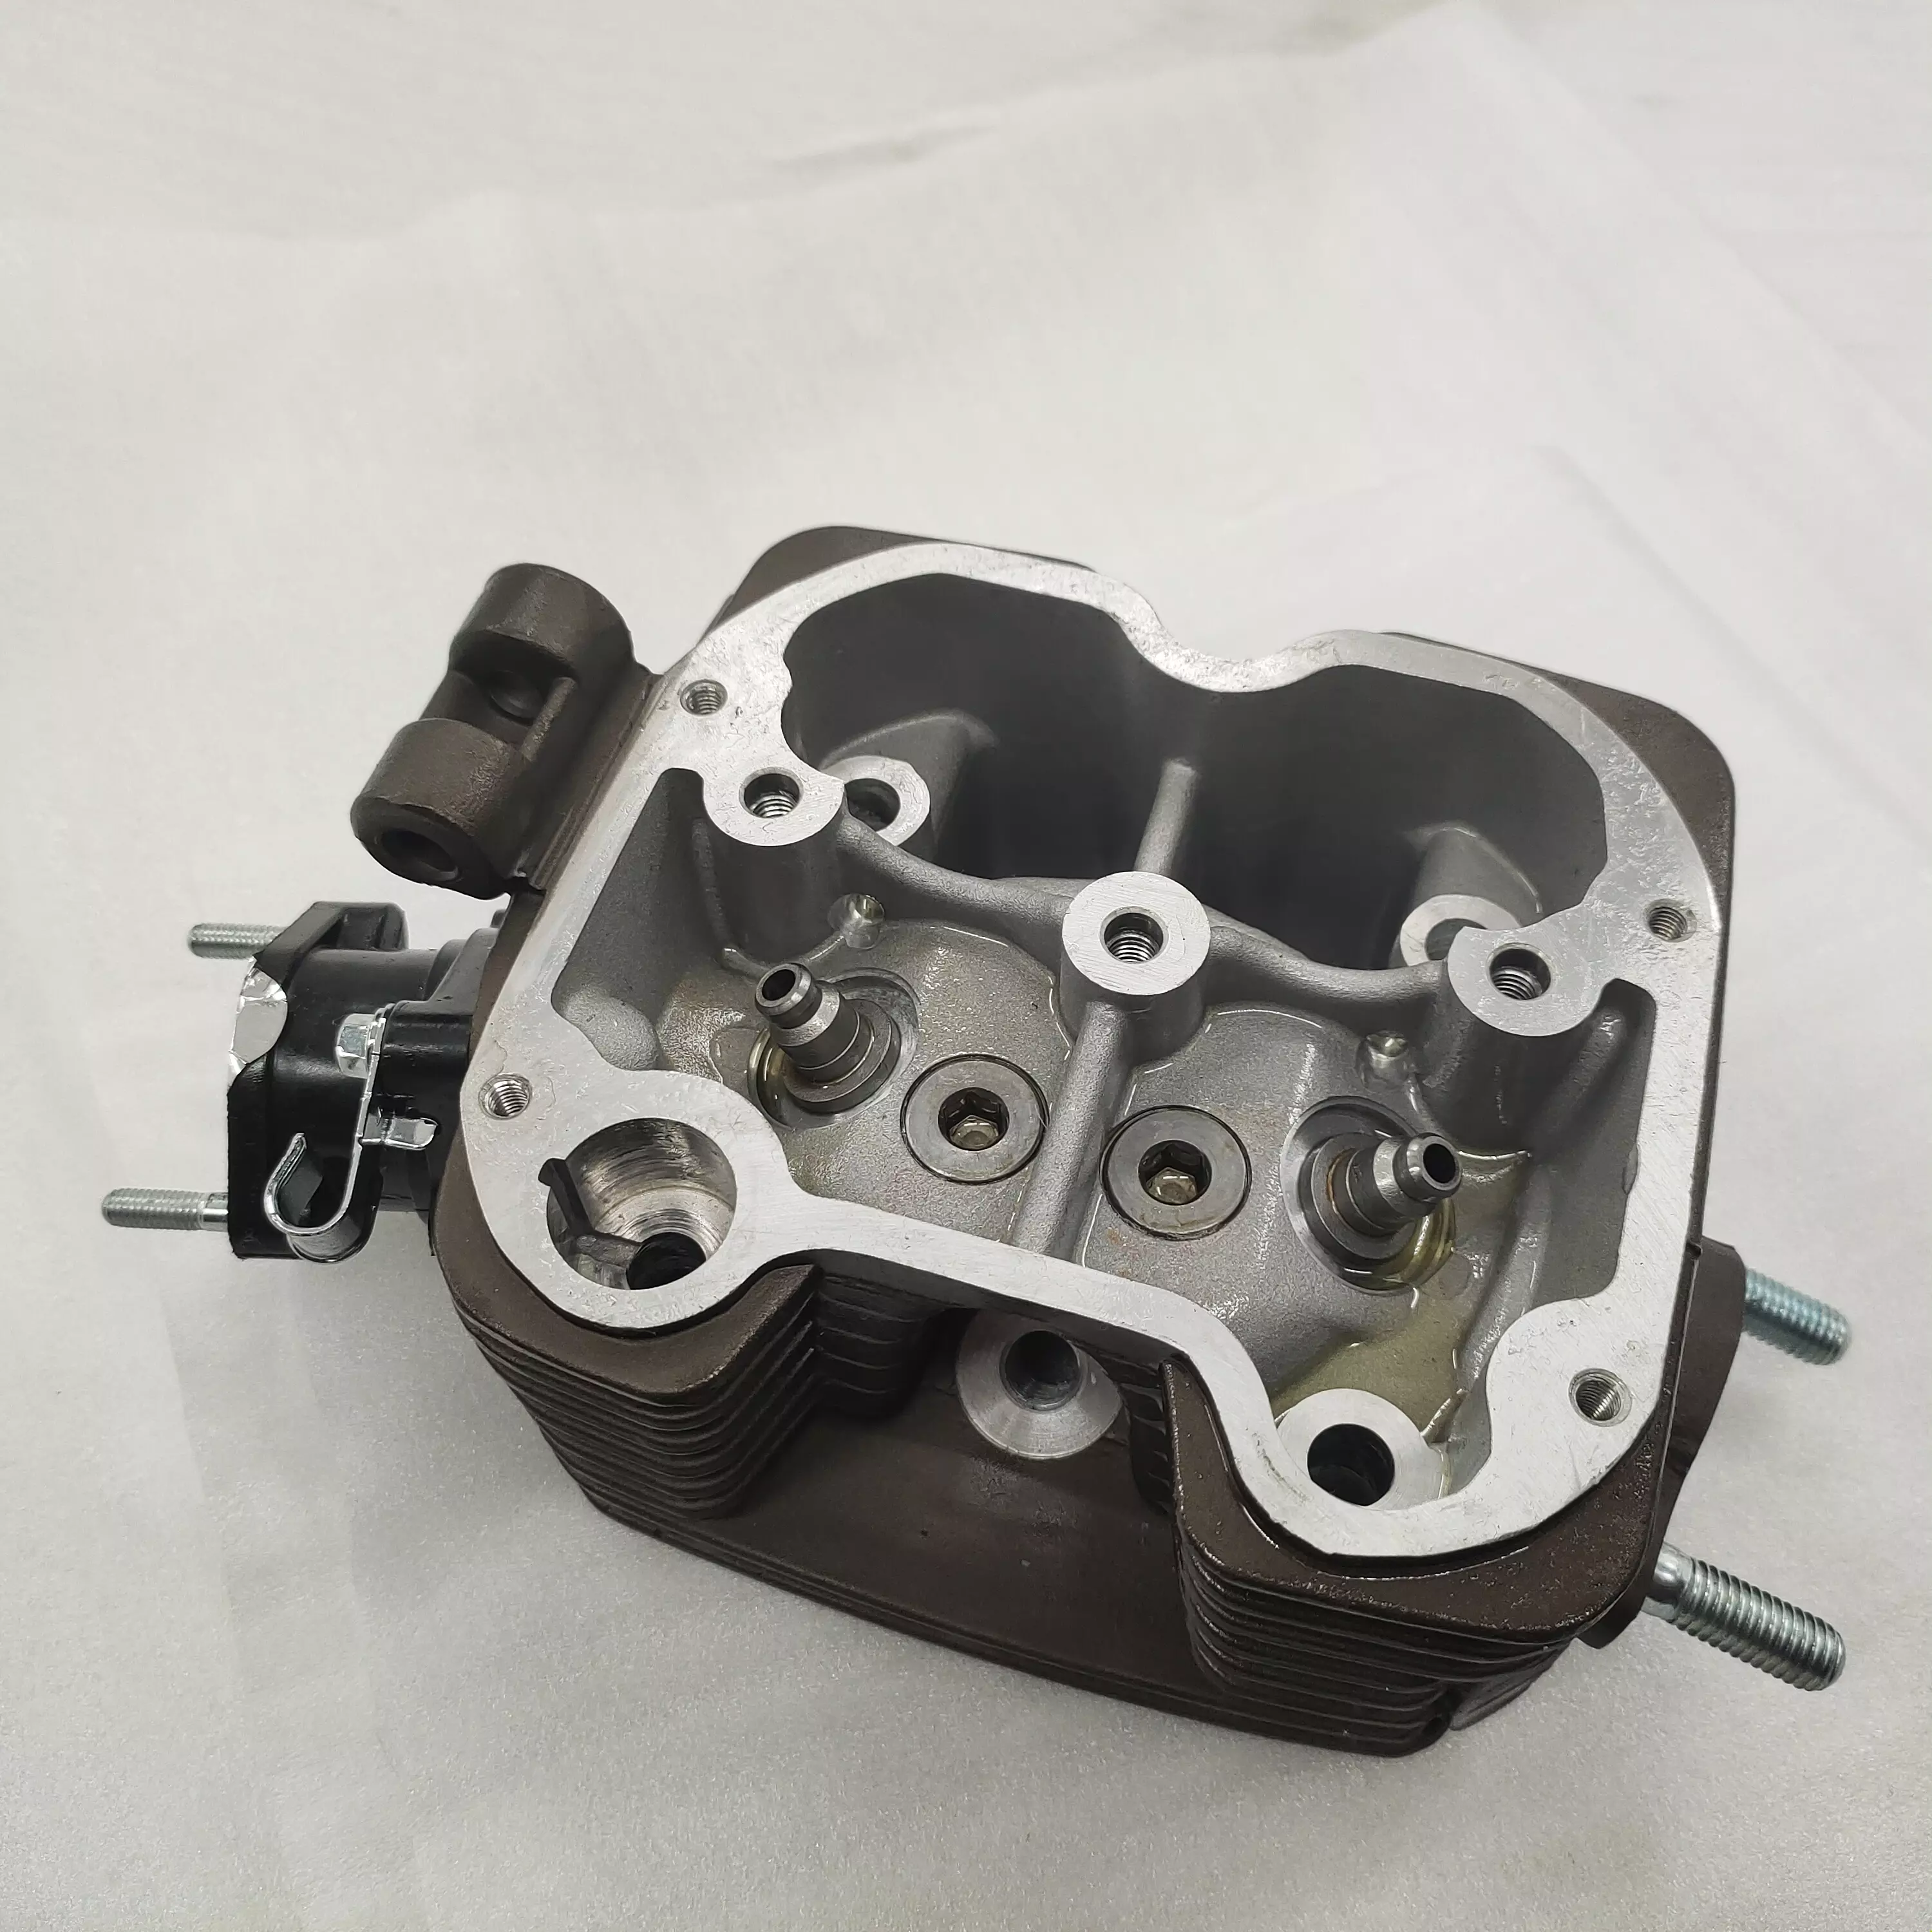 Motorcycle Engine Parts Cylinder Head Block Kit CG150 Box Sets Packing Outer Plastic Material Level Origin Iron Type